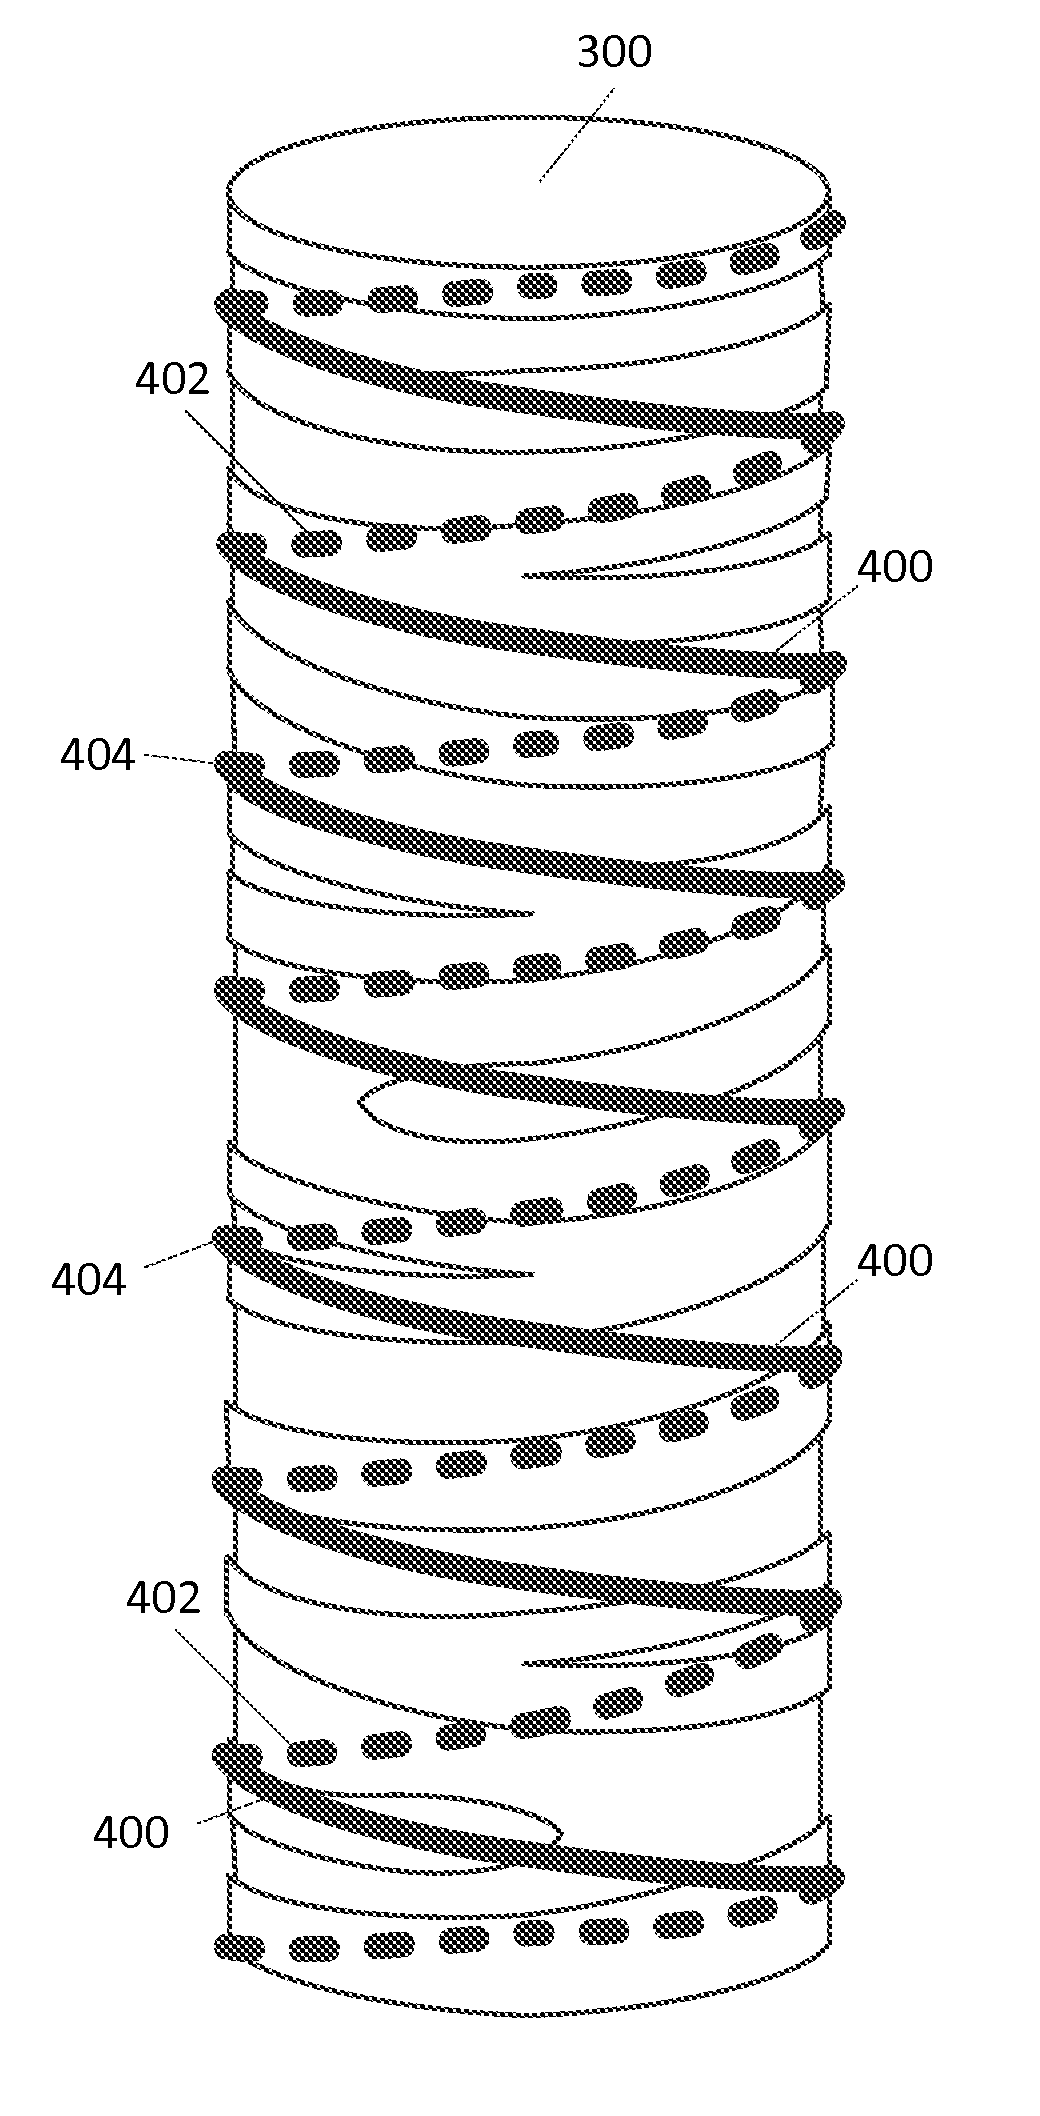 System and method for fabricating custom medical implant devices